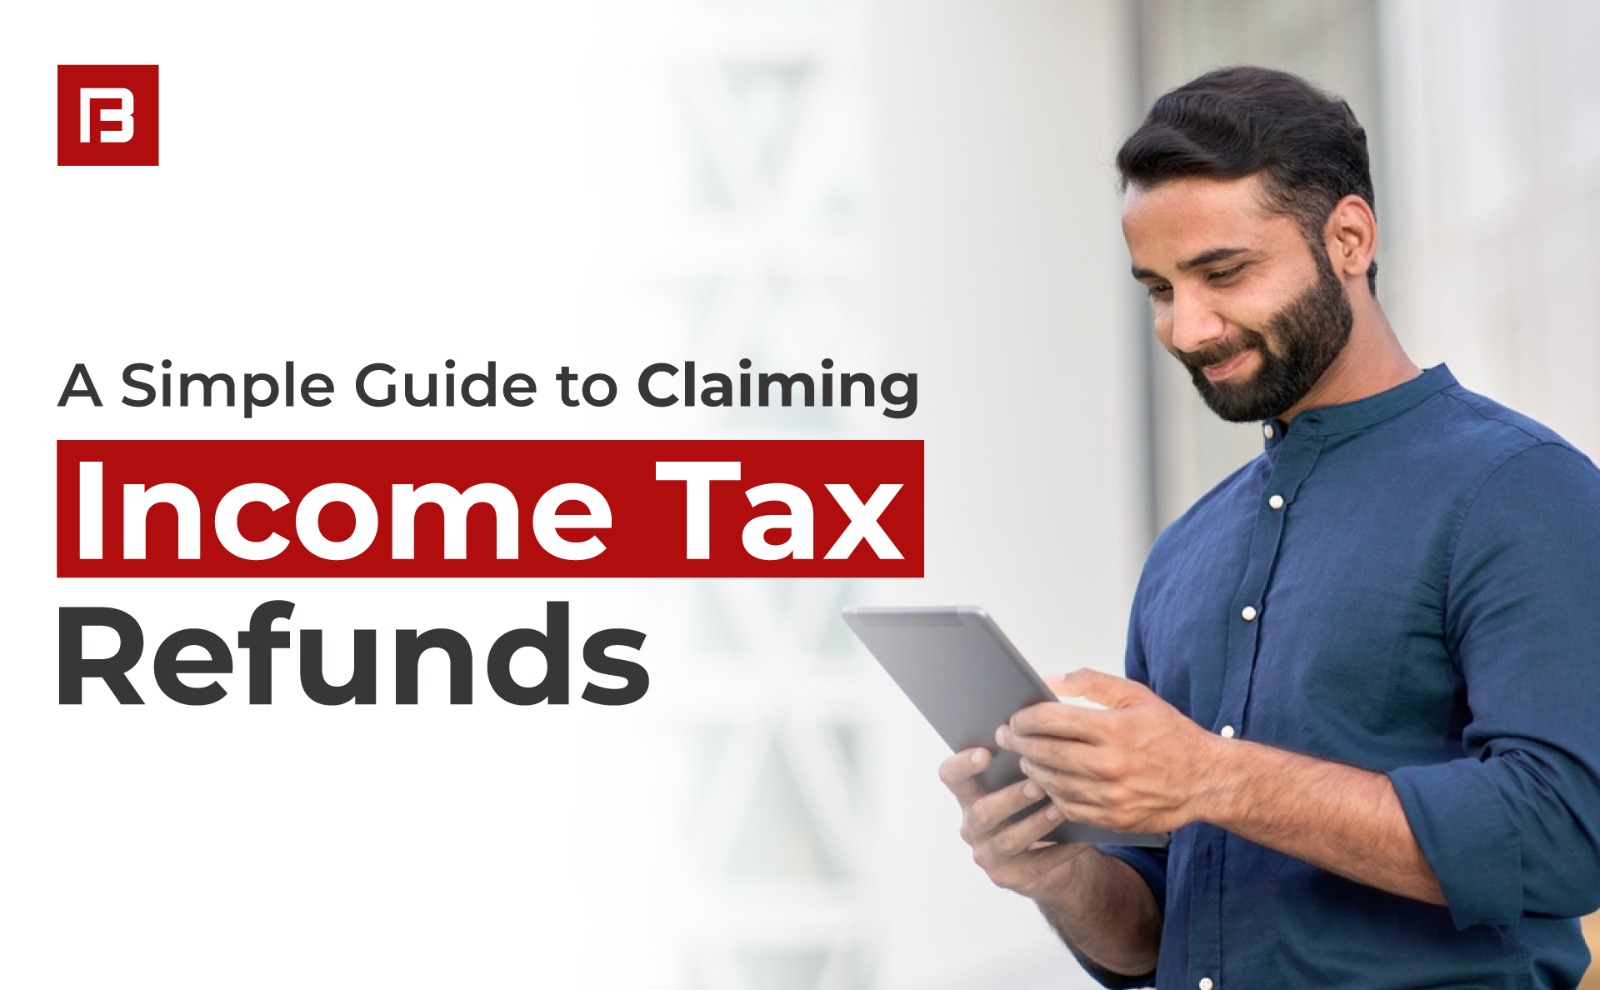 A Simple Guide to Claiming Income Tax Refunds